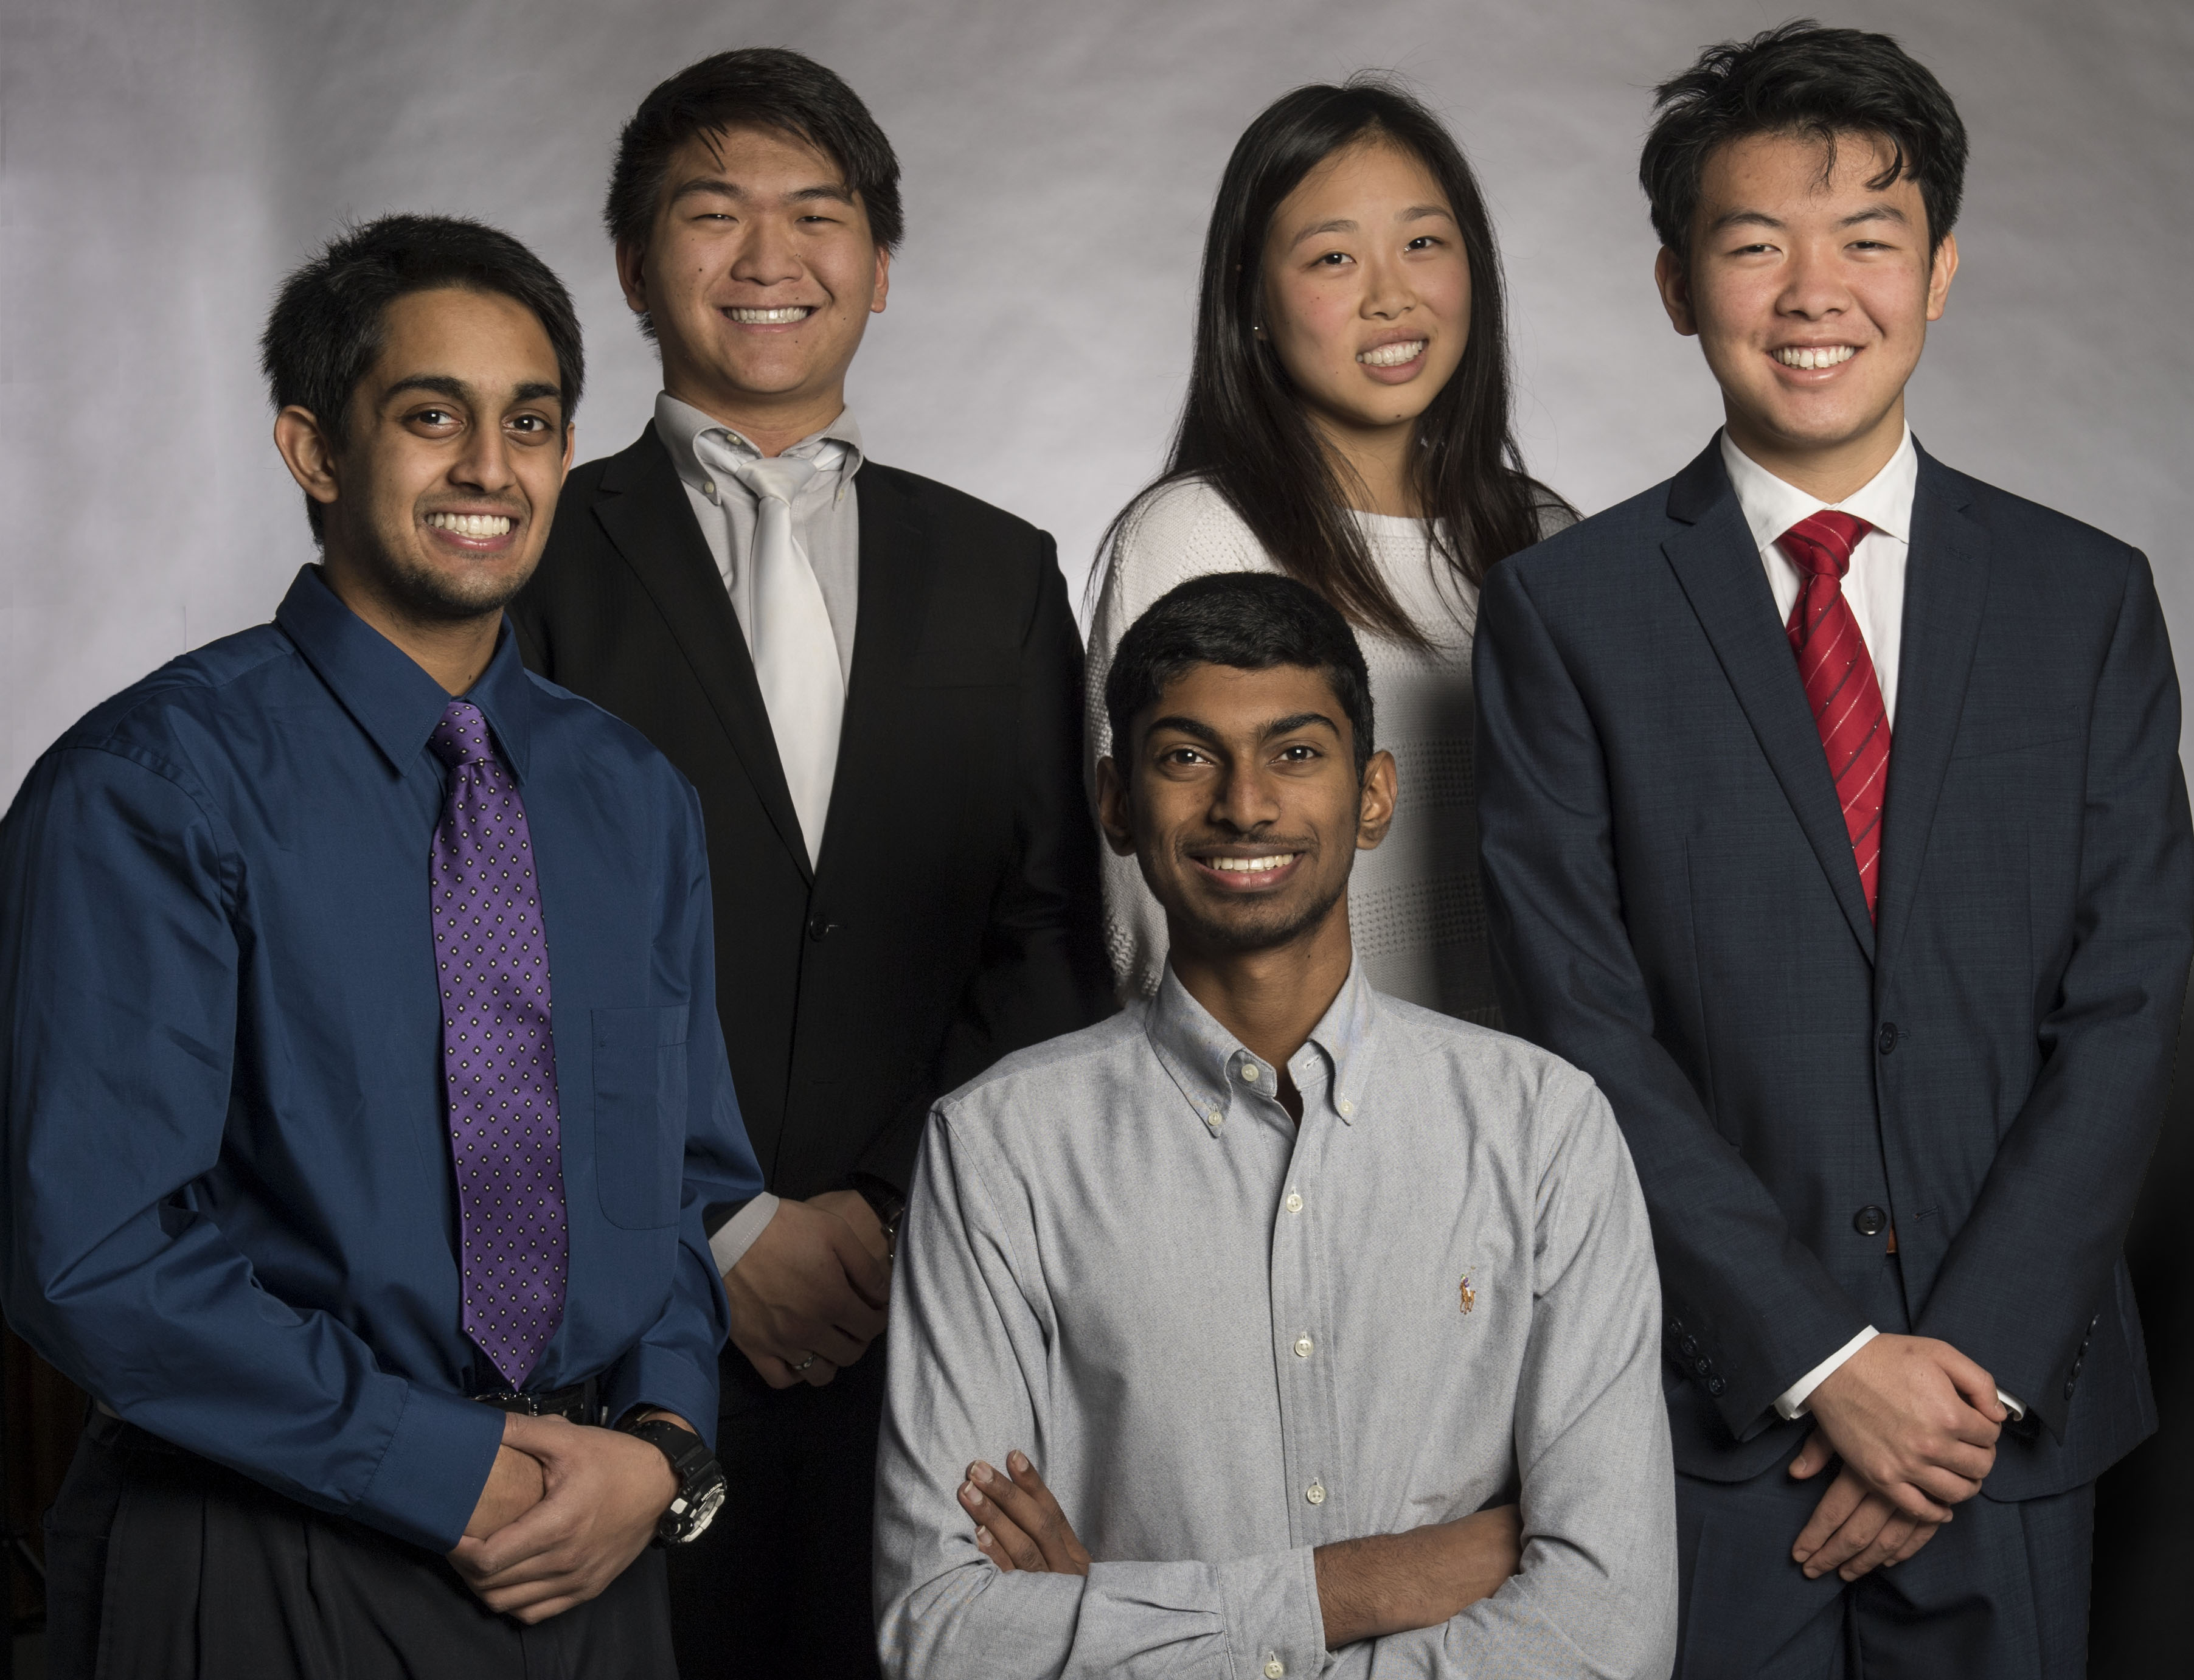 Five students from UNT's Texas Academy of Mathematics and Science were named semifinalists in the 2018 Regeneron Science Talent Search, which honors research of high school students. The students are (front row) Ashwin Kumar of Irving, Abhishek Mohan of Irving and Tan Yan of Coppell, and (back row) Ted Zhao of Arlington and Sarah Zou of Sugar Land.